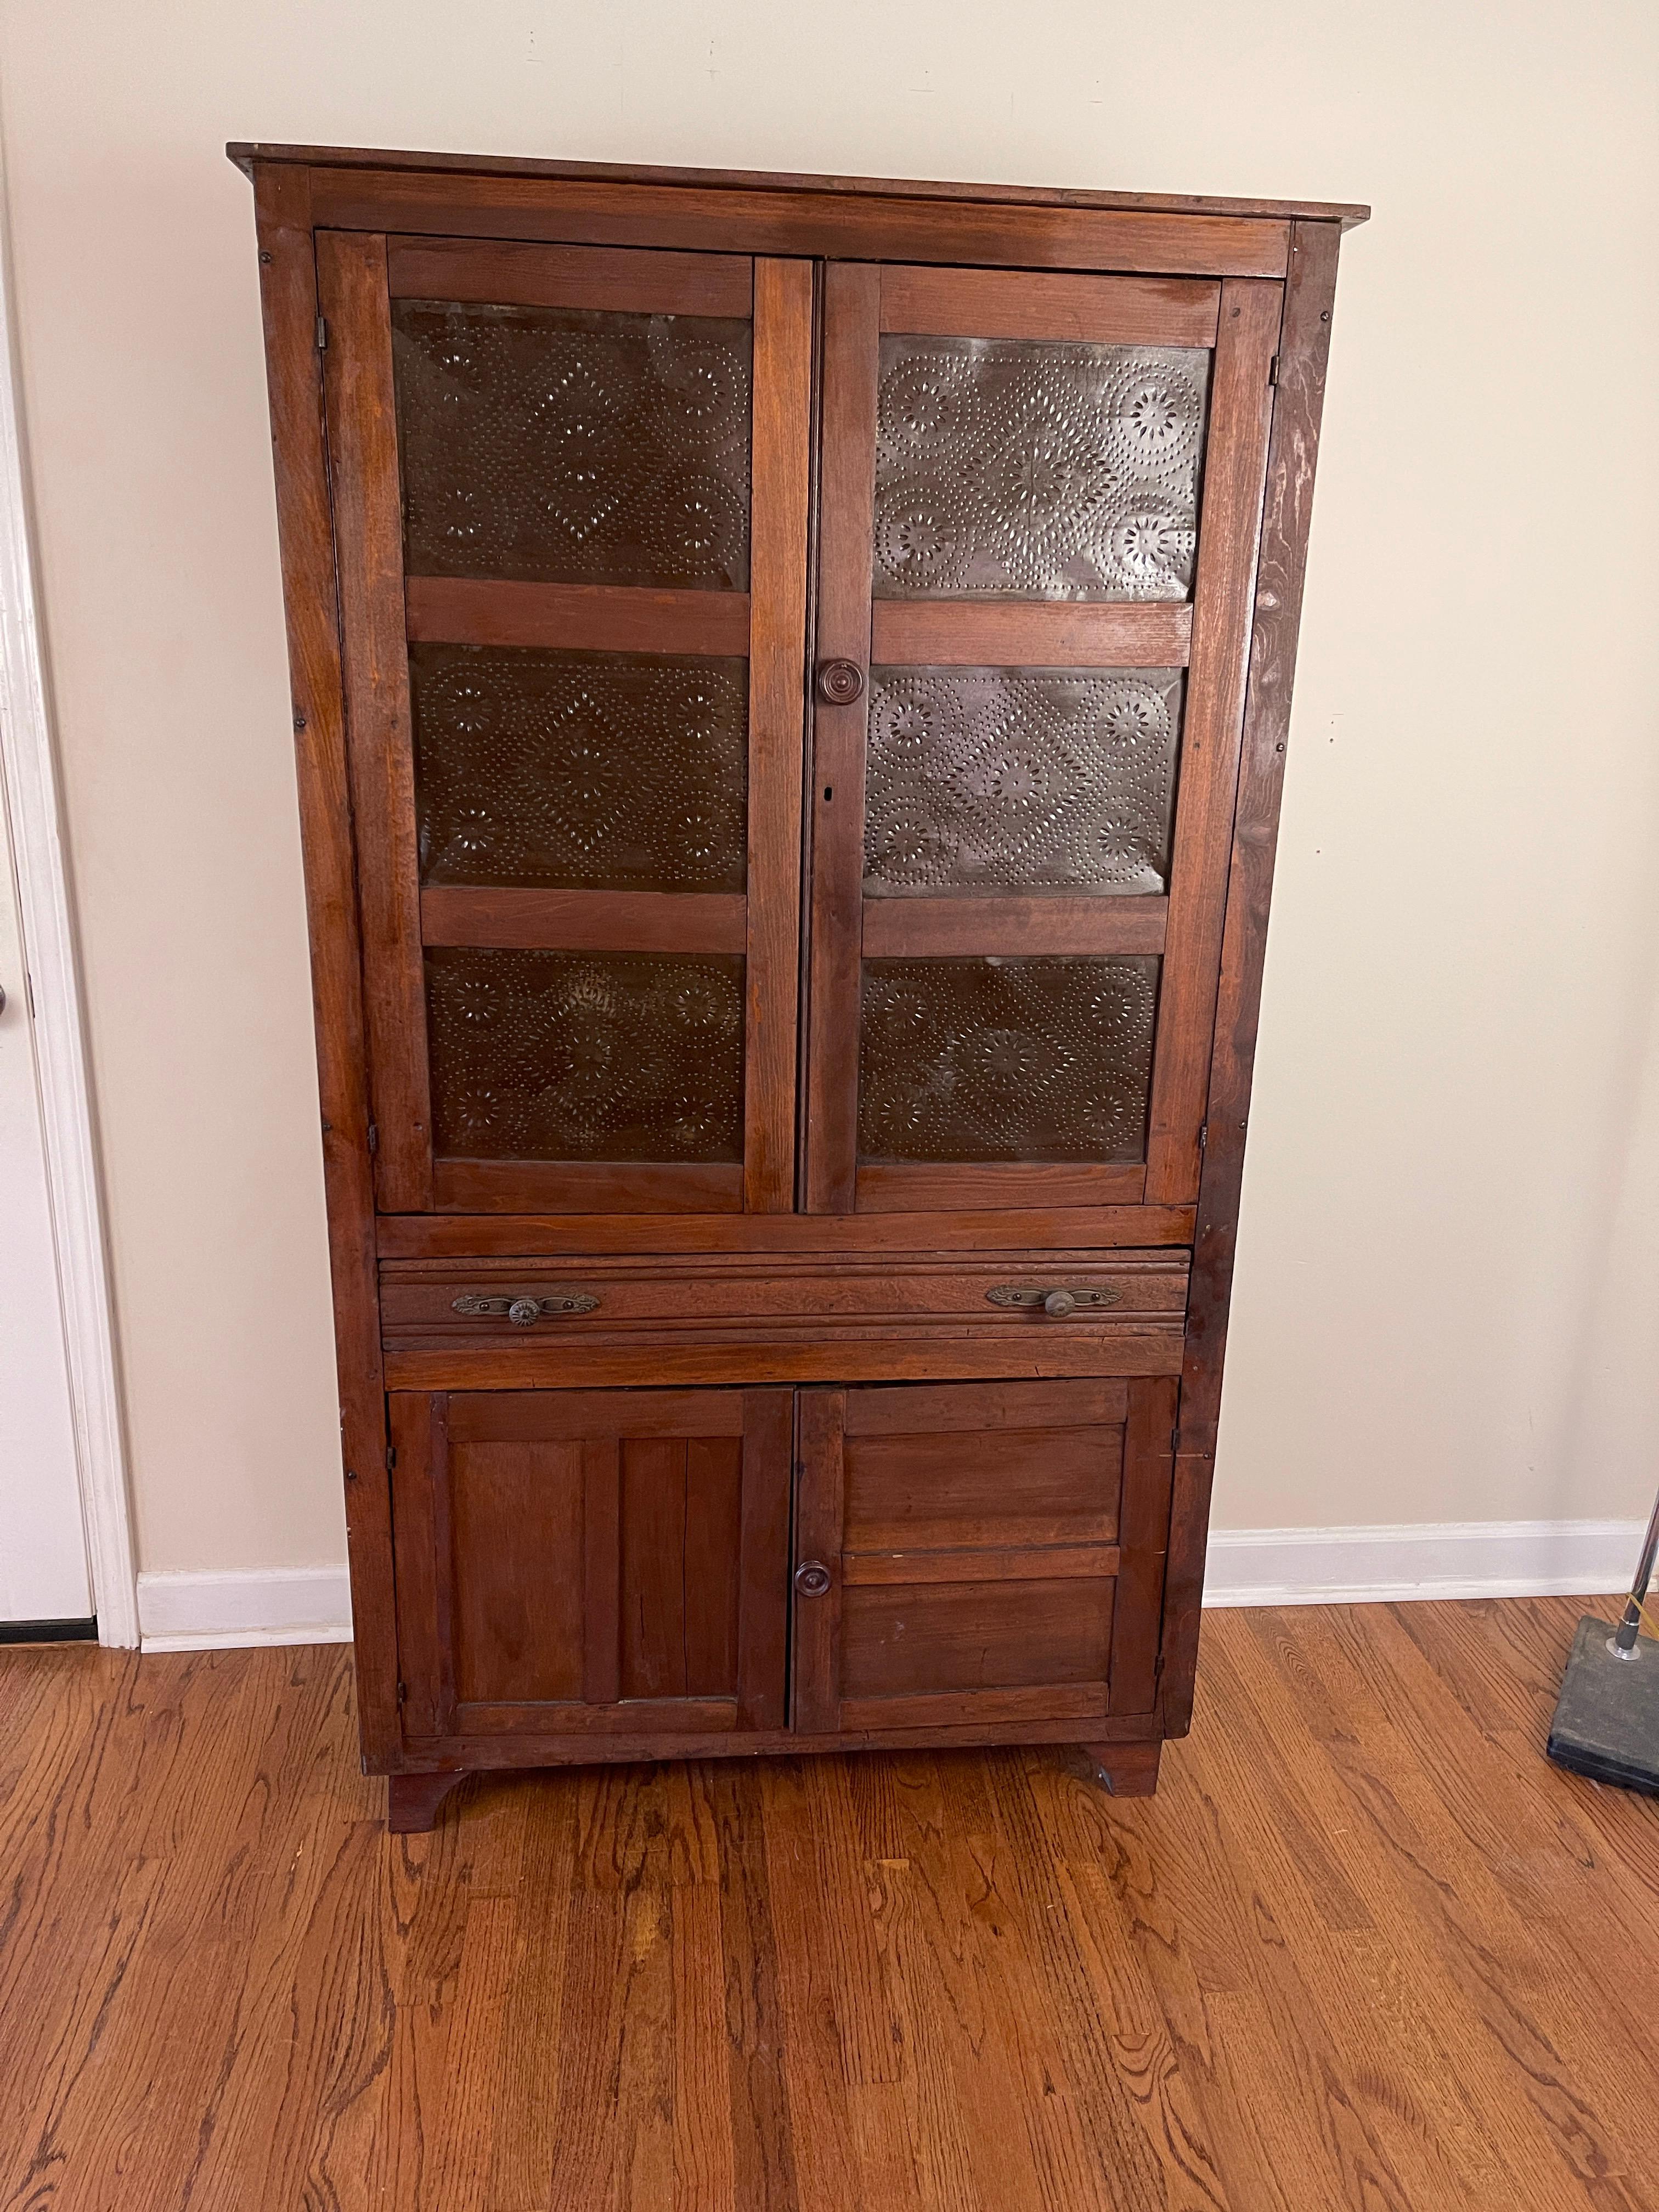 Very old, but still sturdy, South Carolina pie safe.
More tin panels than is usually found.
Made of various light colored woods.
Never painted.
Ten beautiful punched tin panels.
One drawer.
Lower storage also.
Original shelves are lost ; replaced by